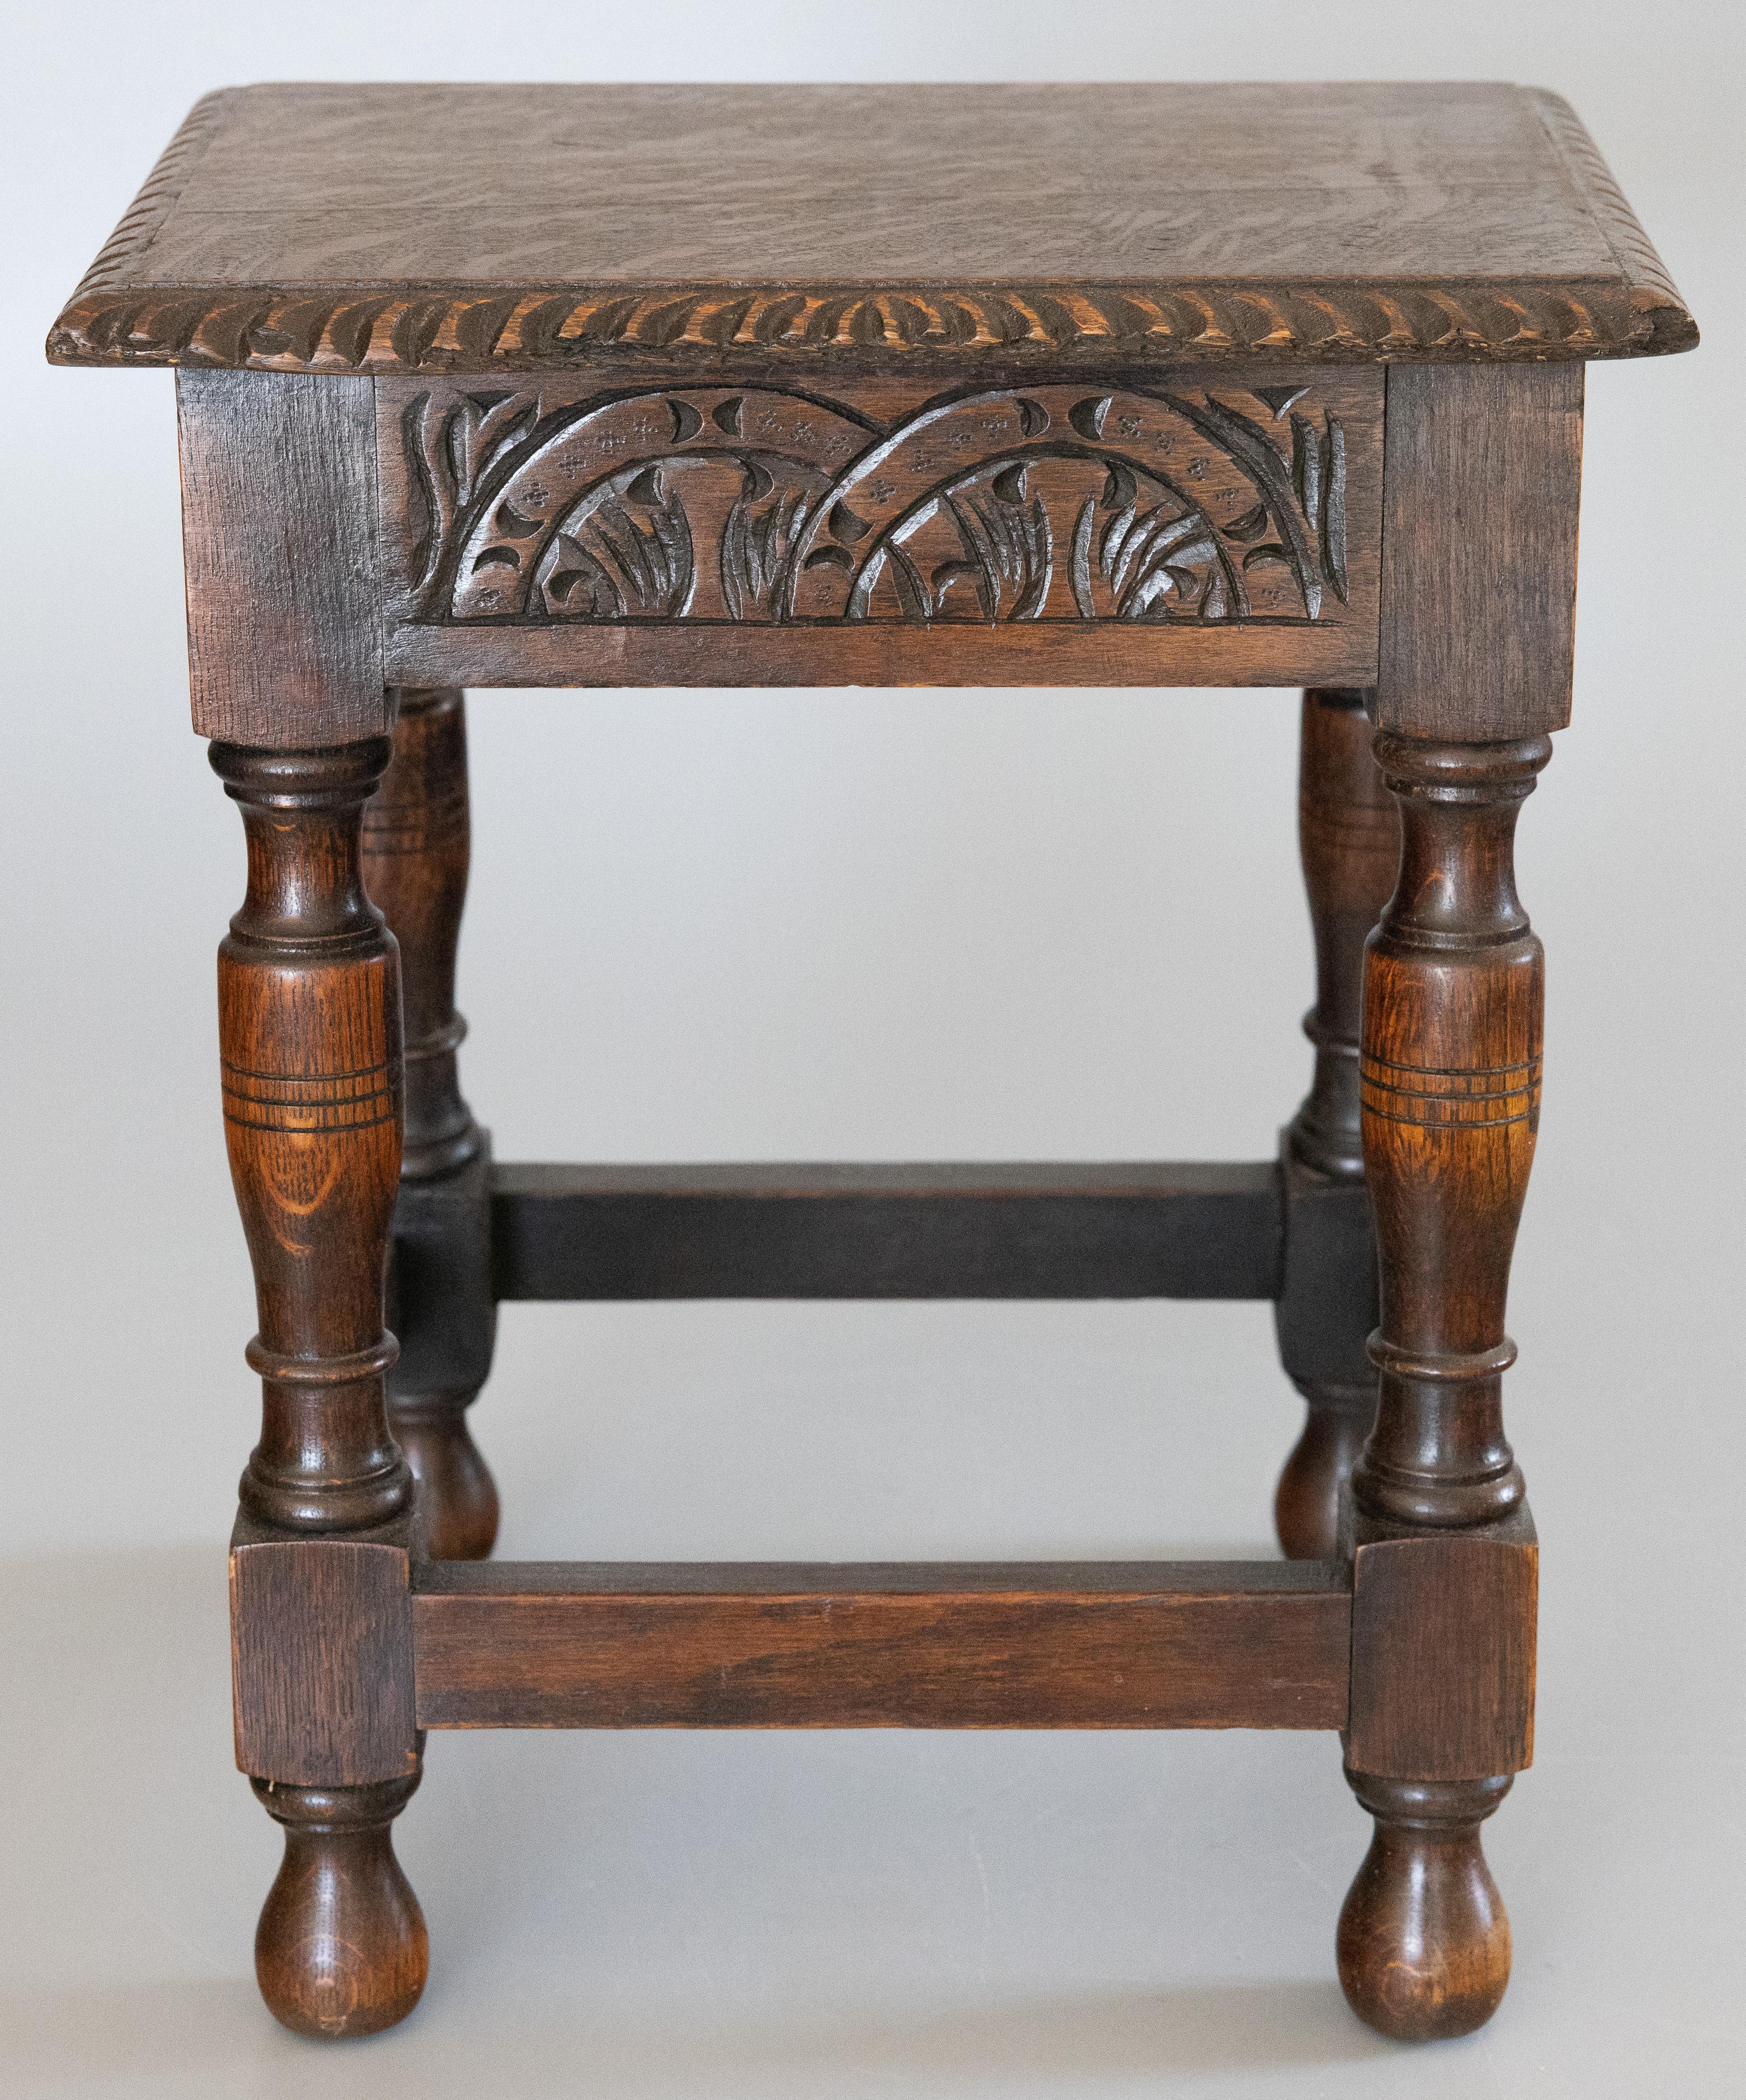 A superb antique early 20th-Century English oak joint stool with a beautifully carved apron, hand turned legs, and lovely figured tiger oak seat with scalloped edges. This fine stool would be great for extra seating and also perfect as a side table